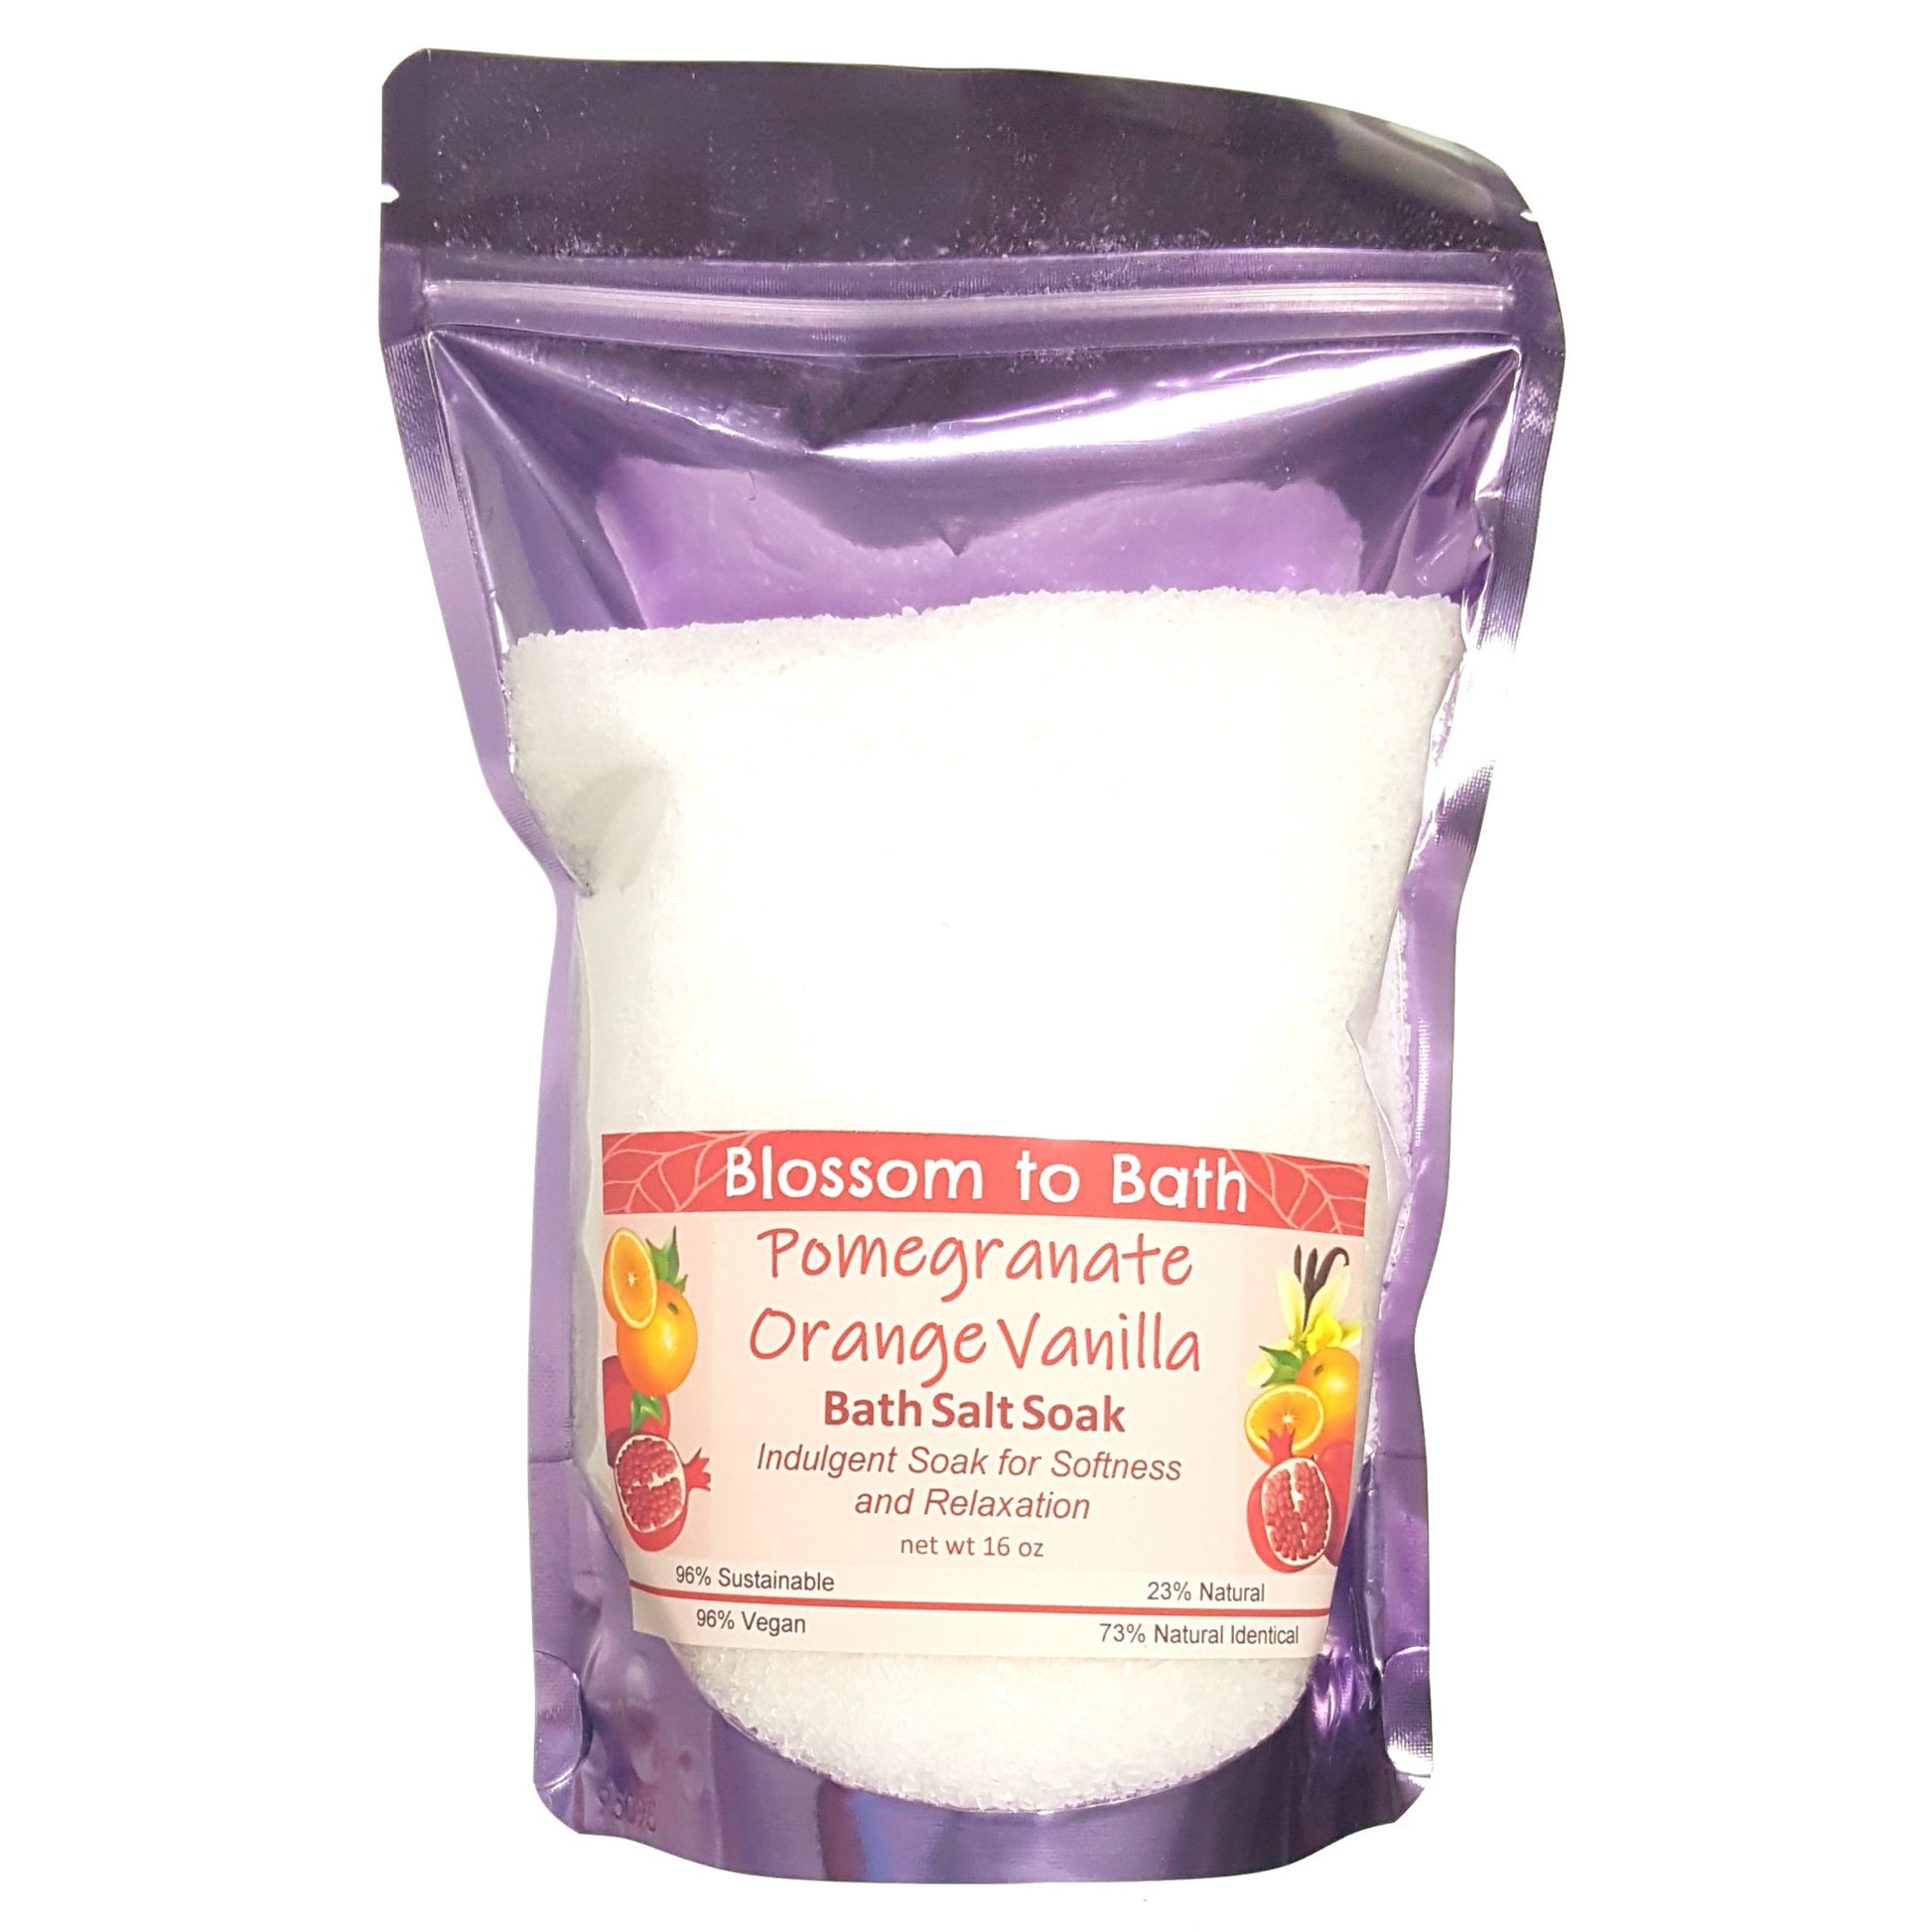 Buy Blossom to Bath Pomegranate Orange Vanilla Bath Salt Soak from Flowersong Soap Studio.  Scented epsom salts for a luxurious soaking experience